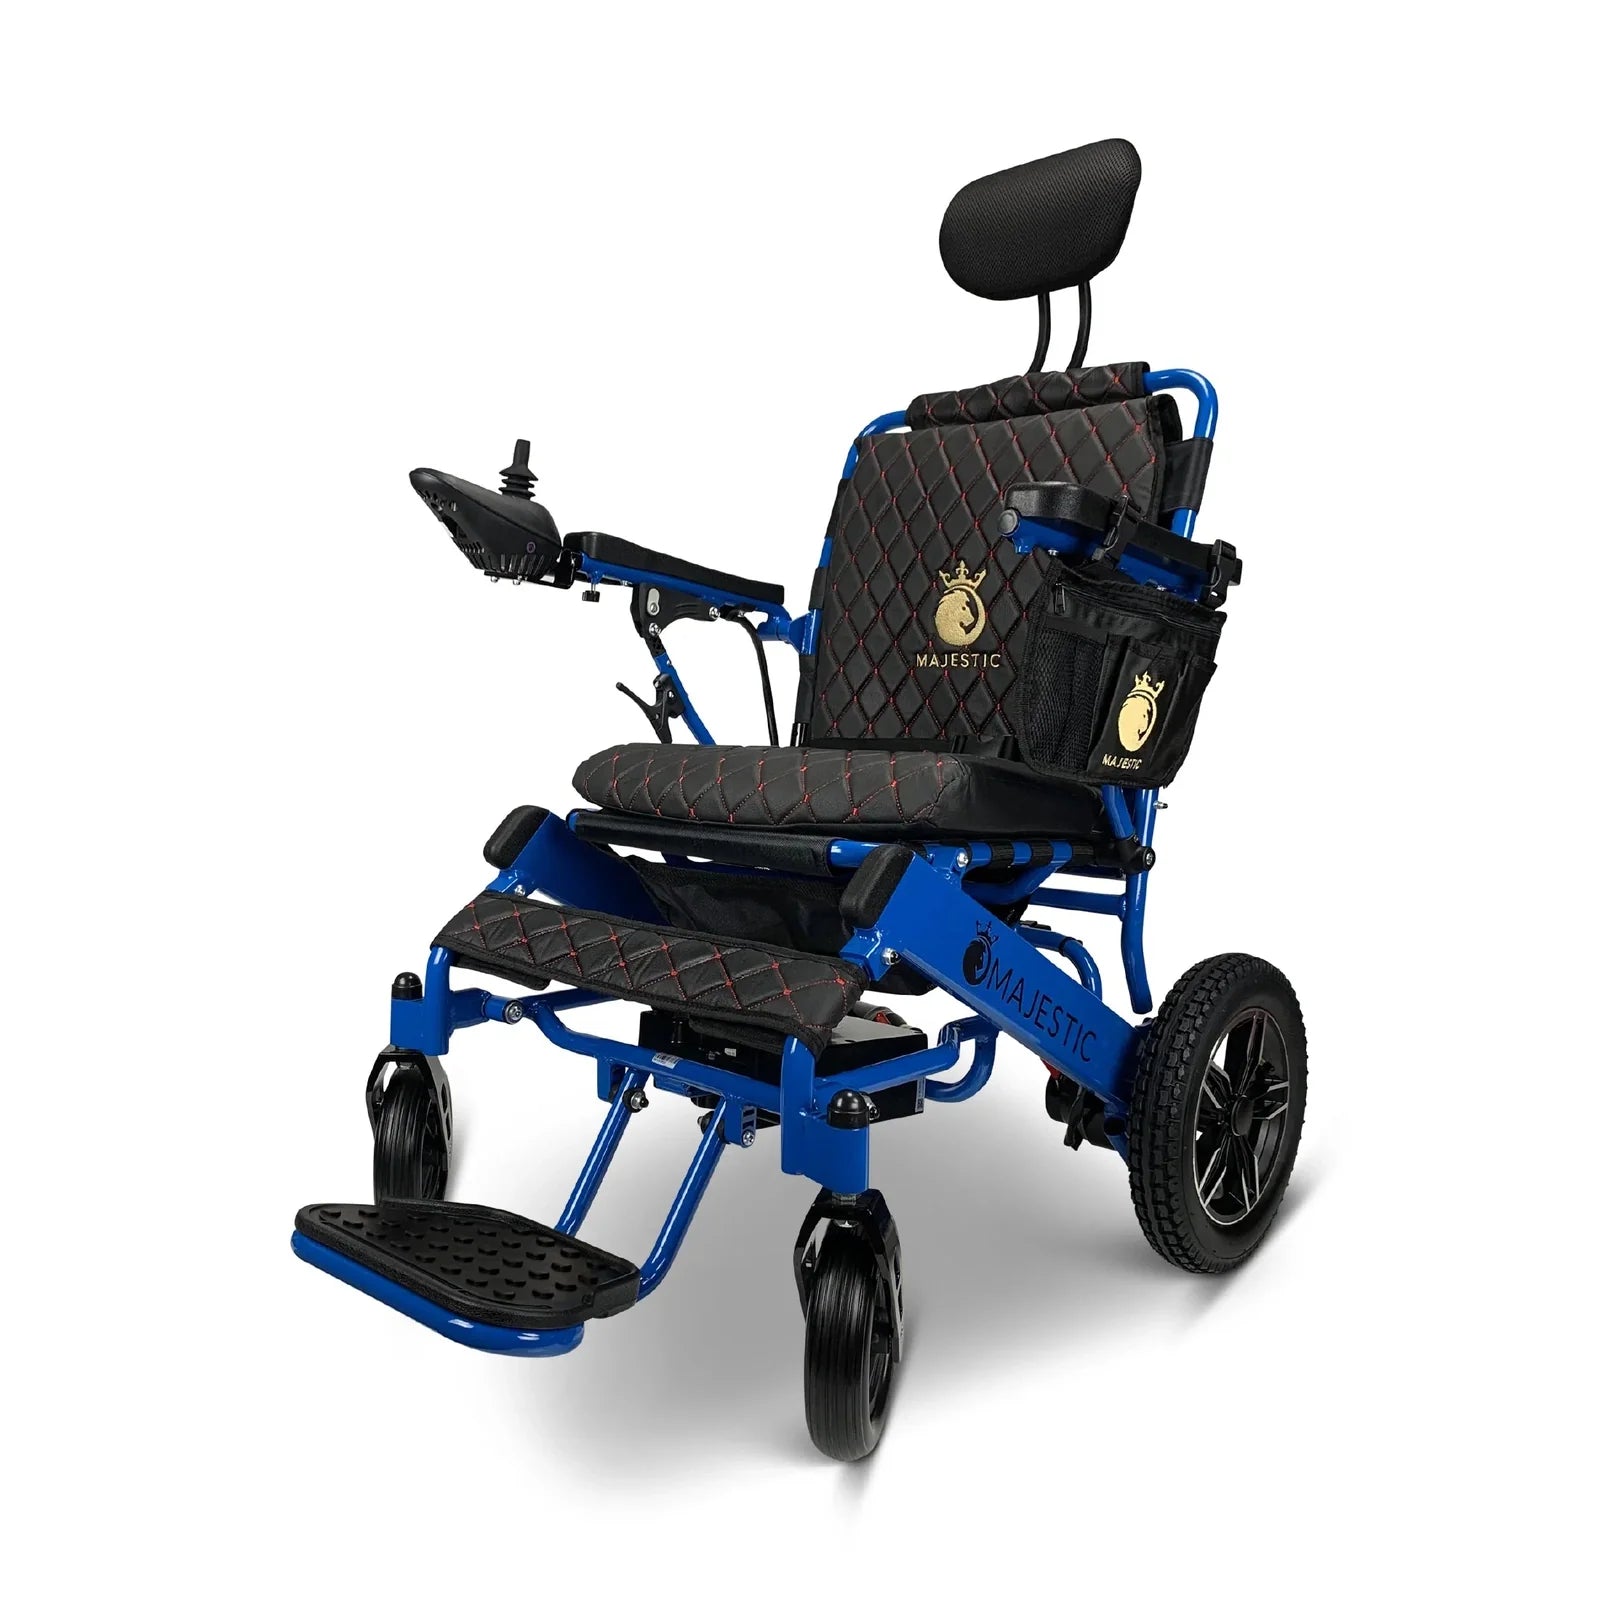 ComfyGO Majestic IQ-8000 Remote Controlled Lightweight Folding Electric Wheelchair Power Wheelchairs ComfyGO Blue Black 10 Miles & 17.5" Seat Width